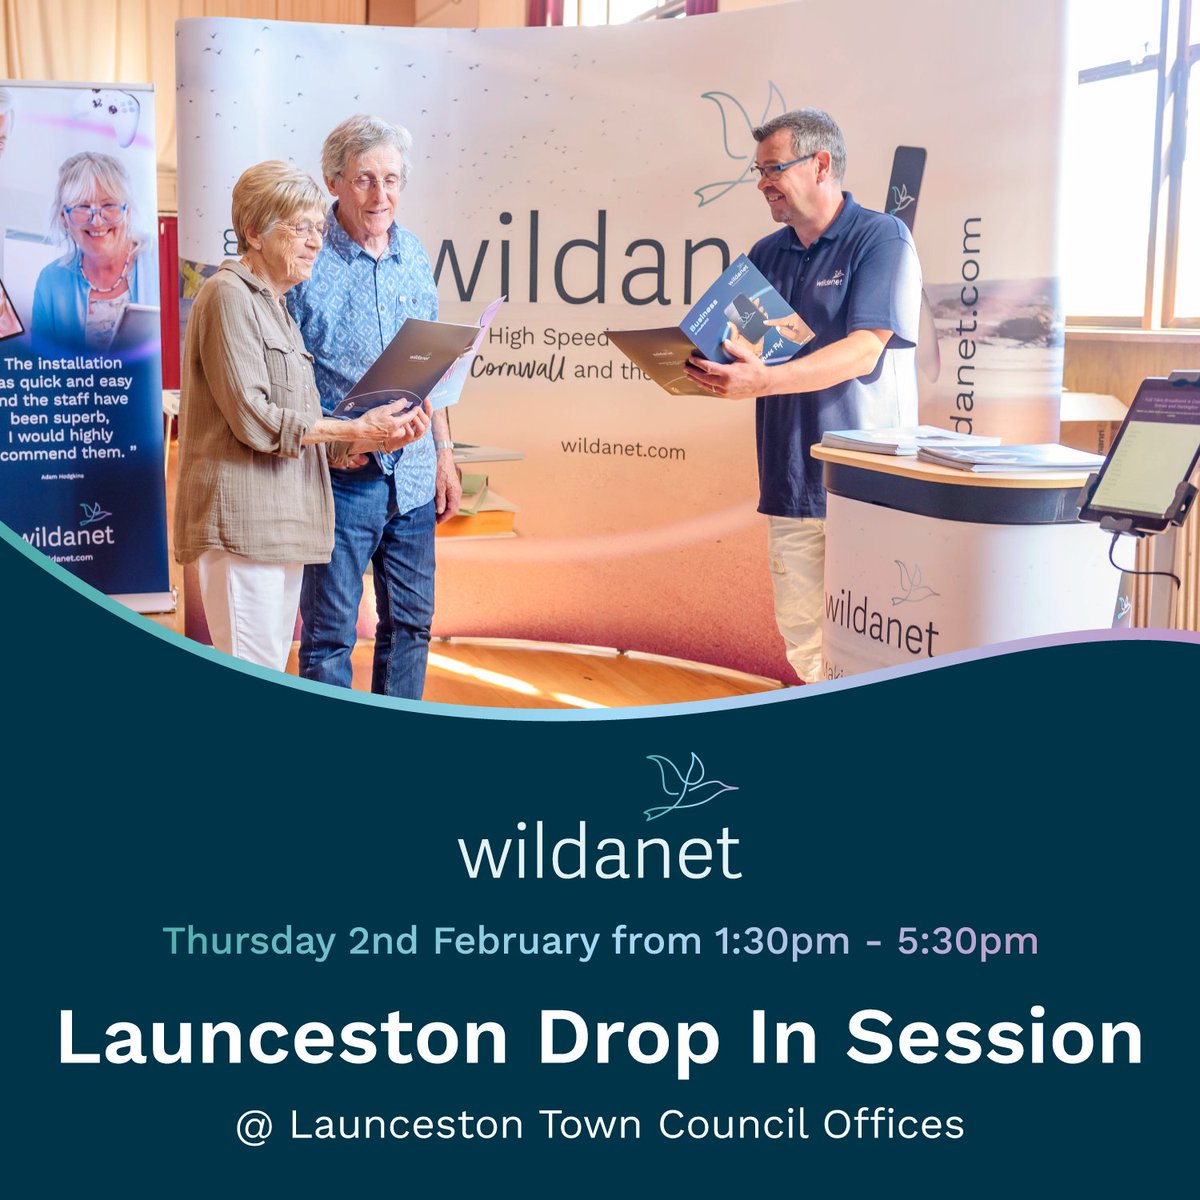 Come and see the team this Thursday 2nd February at Launceston Town Council Offices to find out more about Wildanet's high-speed, full fibre broadband service and our latest amazing offers. #wildanet #launceston #fullfibrebroadband #fromanywheretoeverywhere